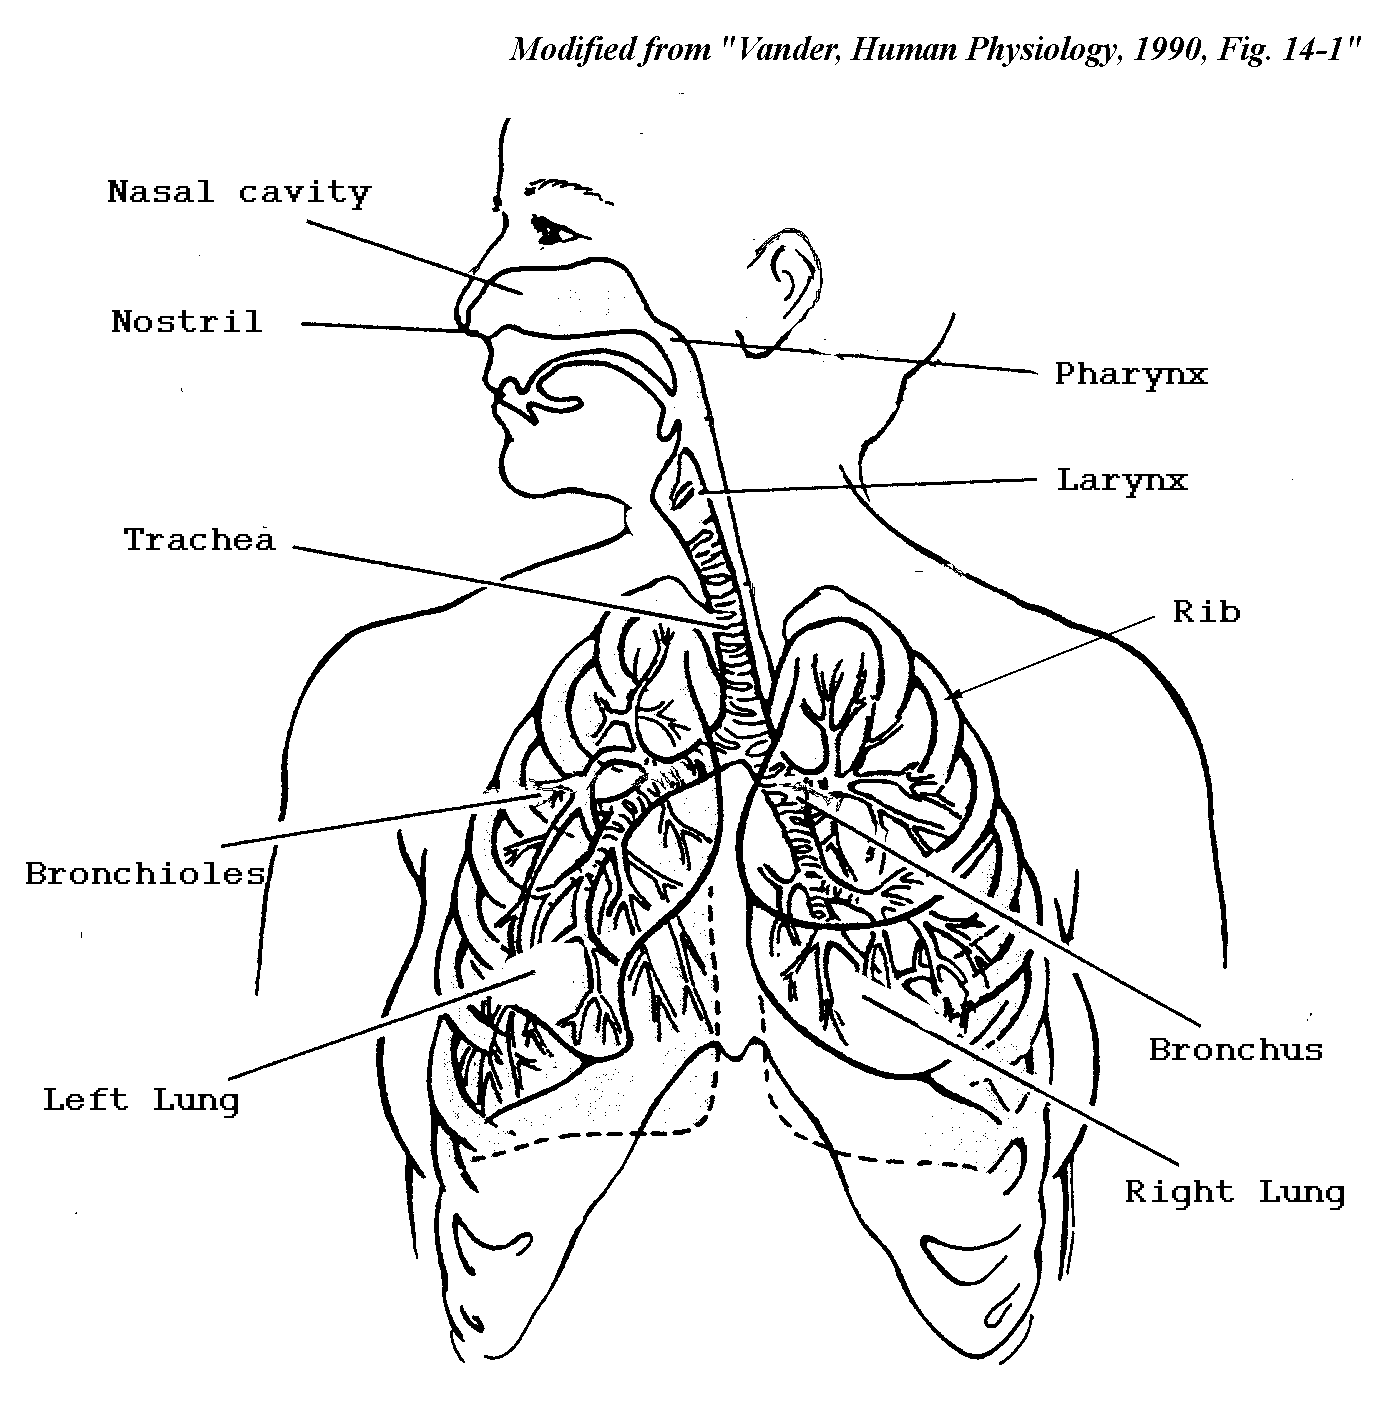 Respiratory System Coloring Page | CC3 Classical Homeschooling for ... |  Coloring books, Anatomy coloring book, Coloring pages